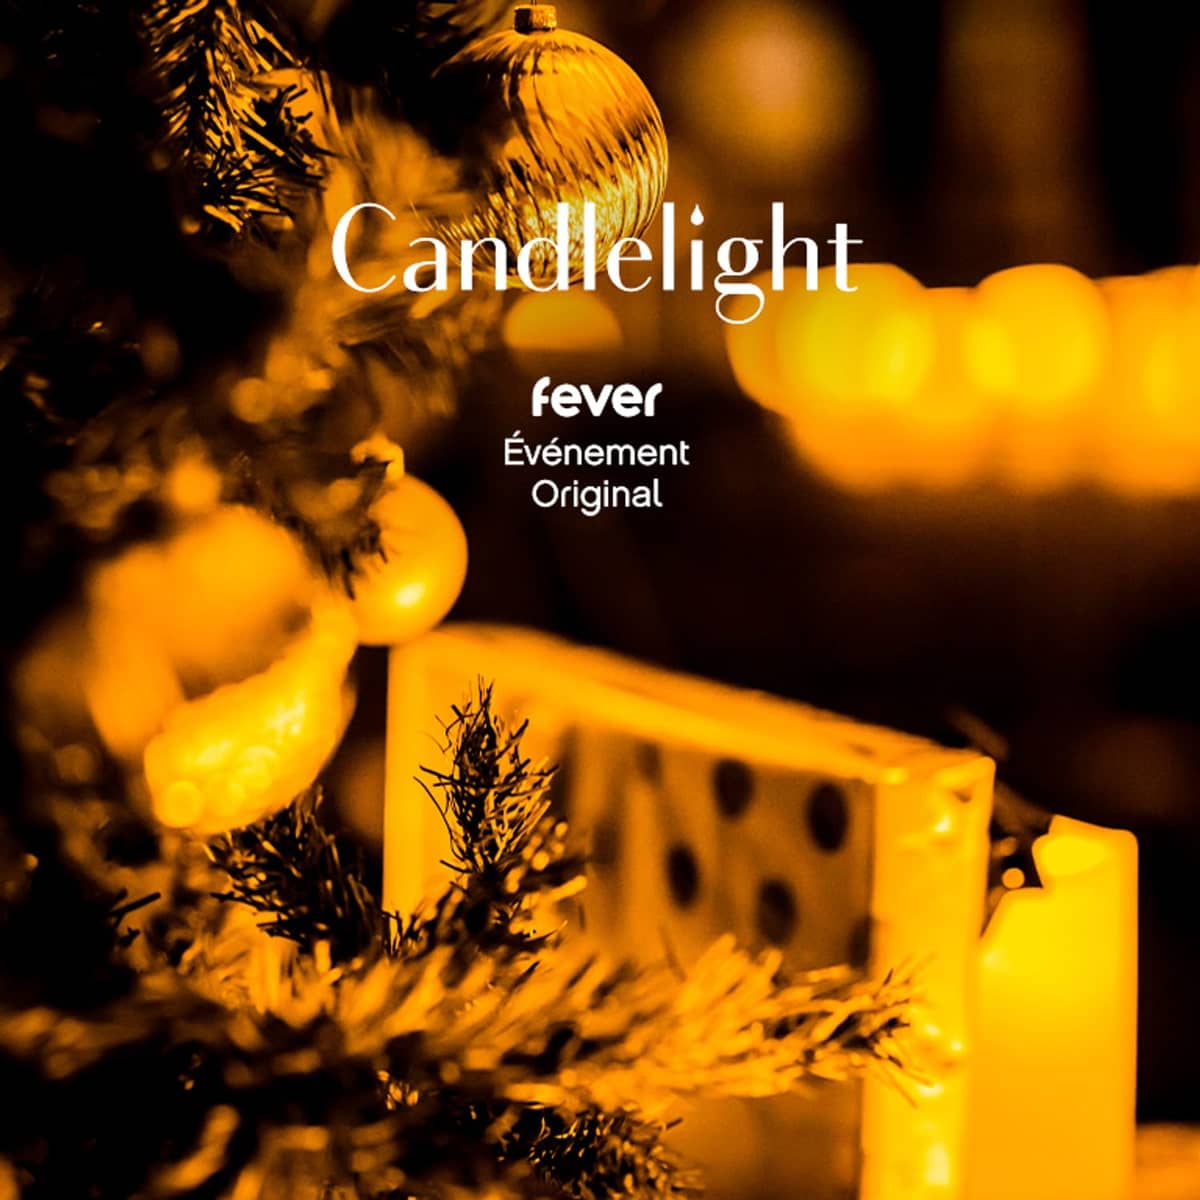 Christmas Music by Candlelight